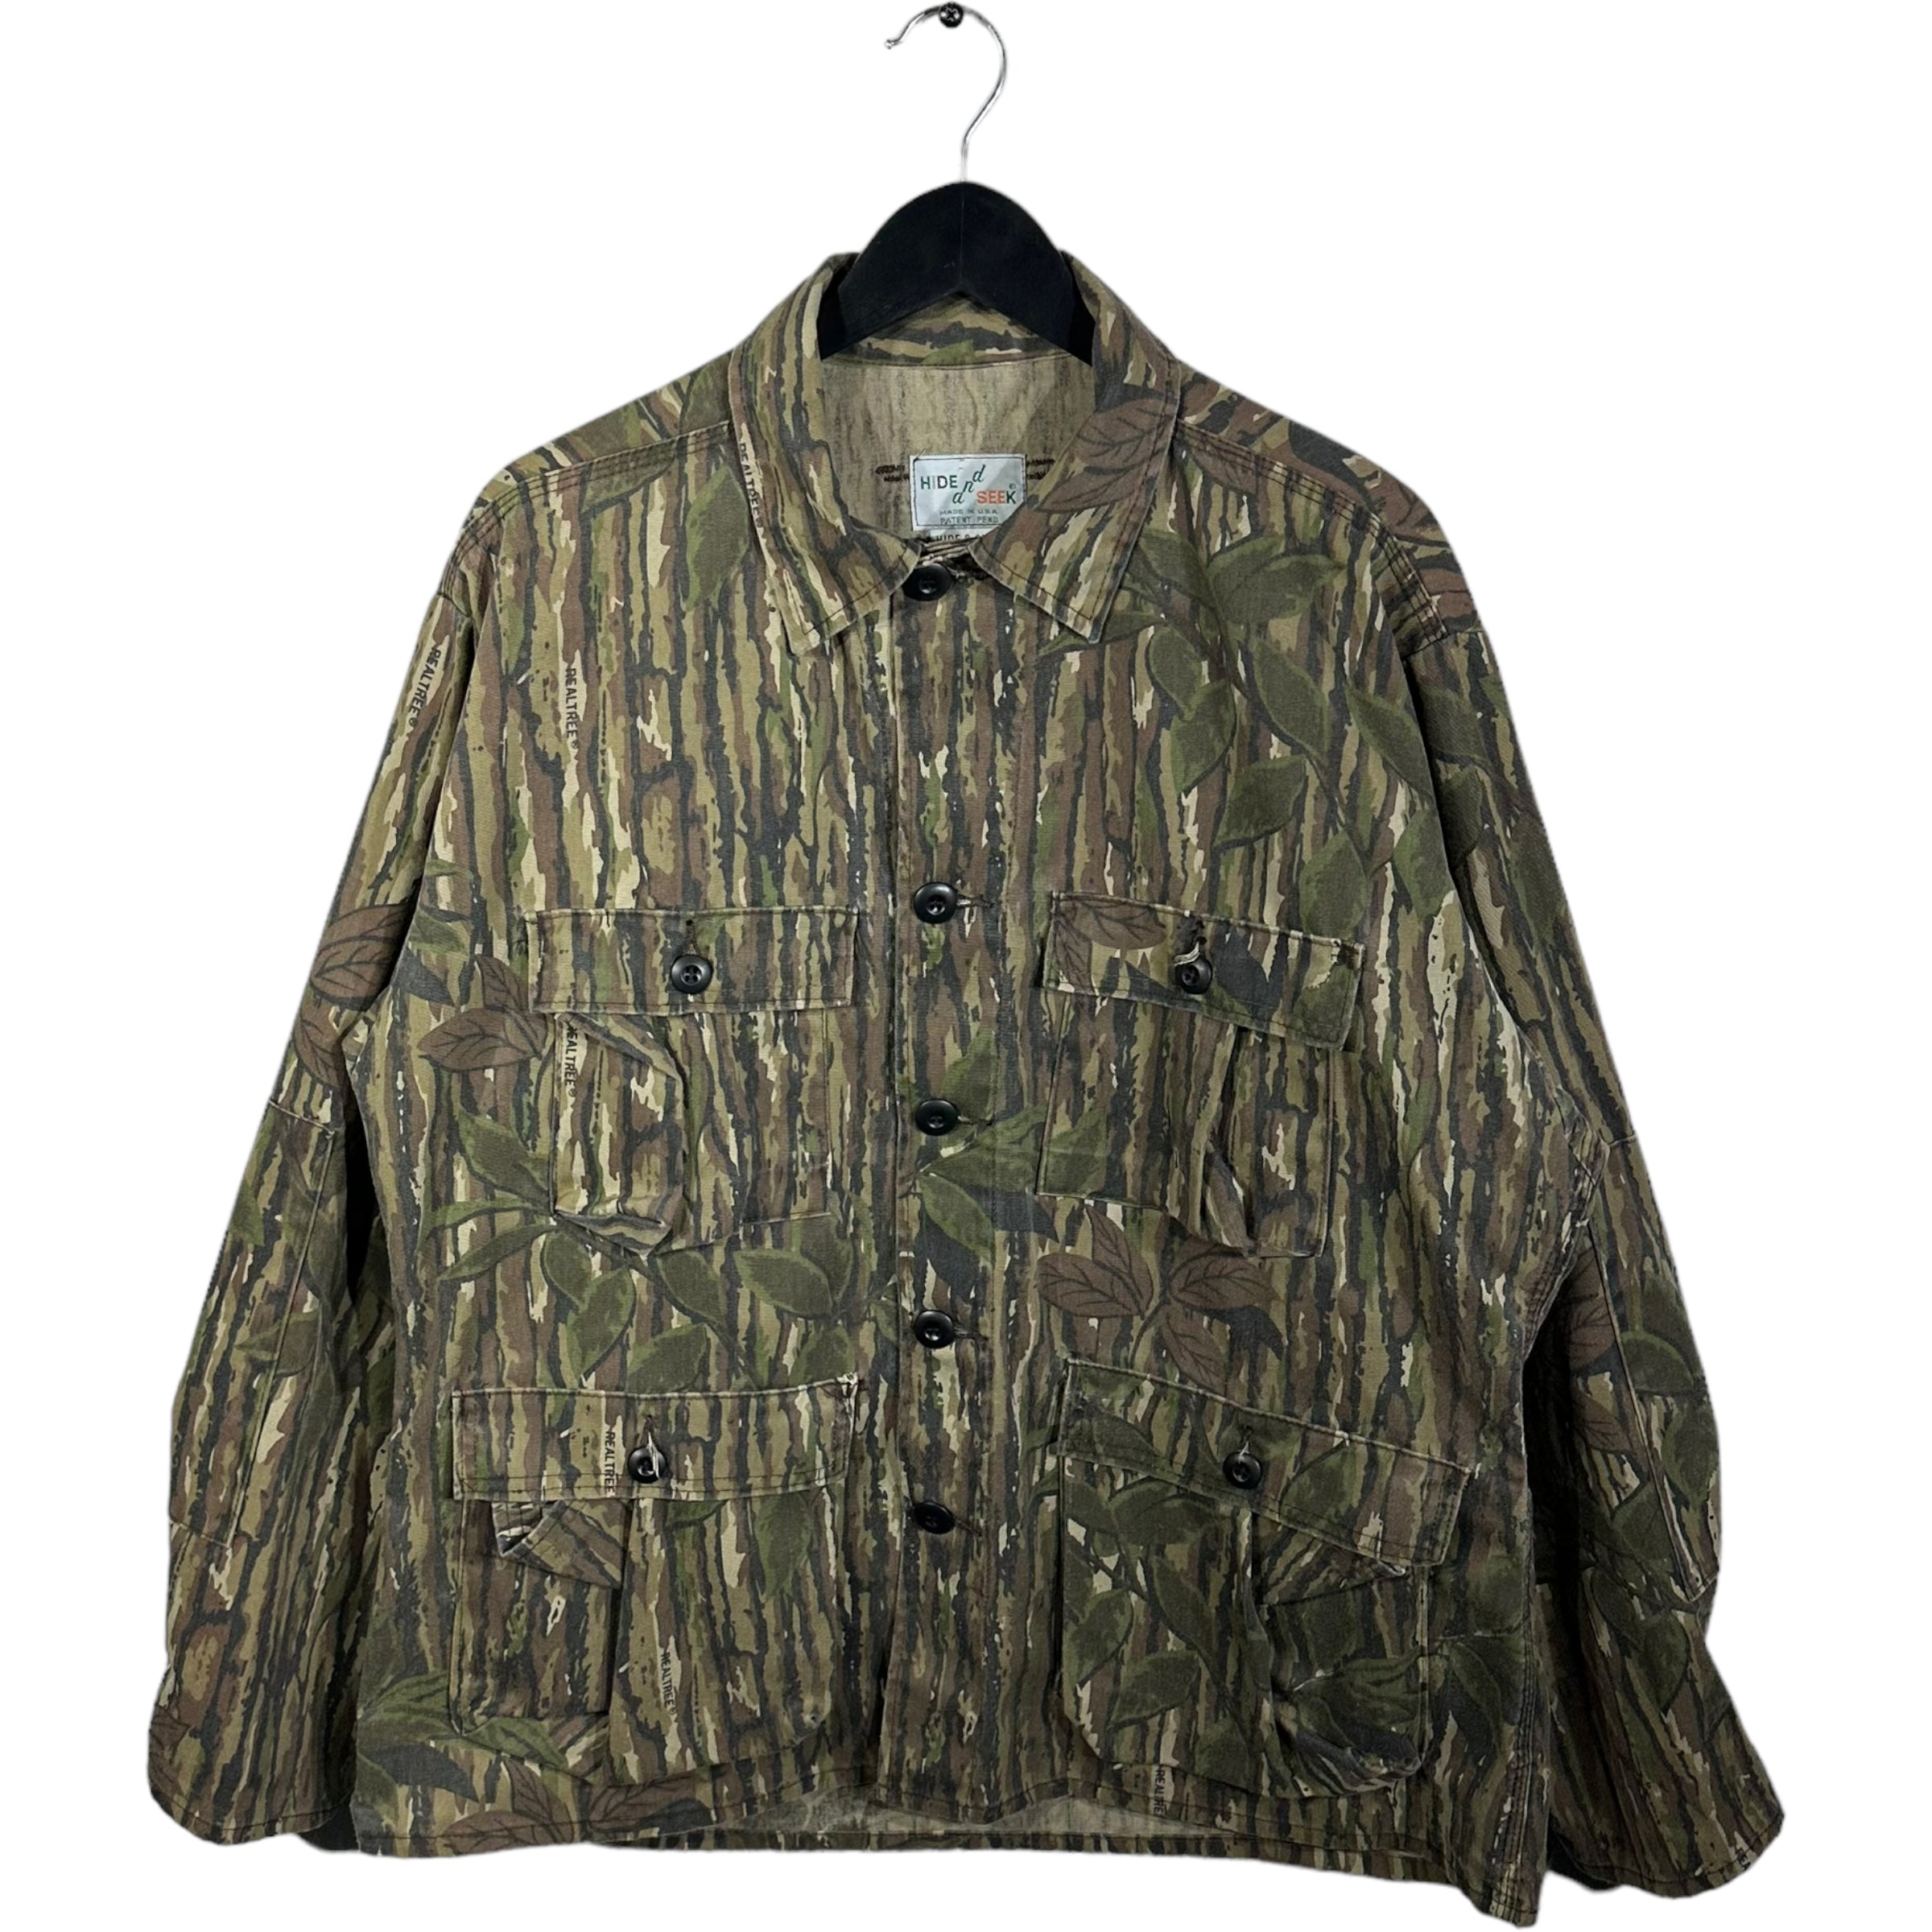 Vintage RealTree Camo Military Button Up